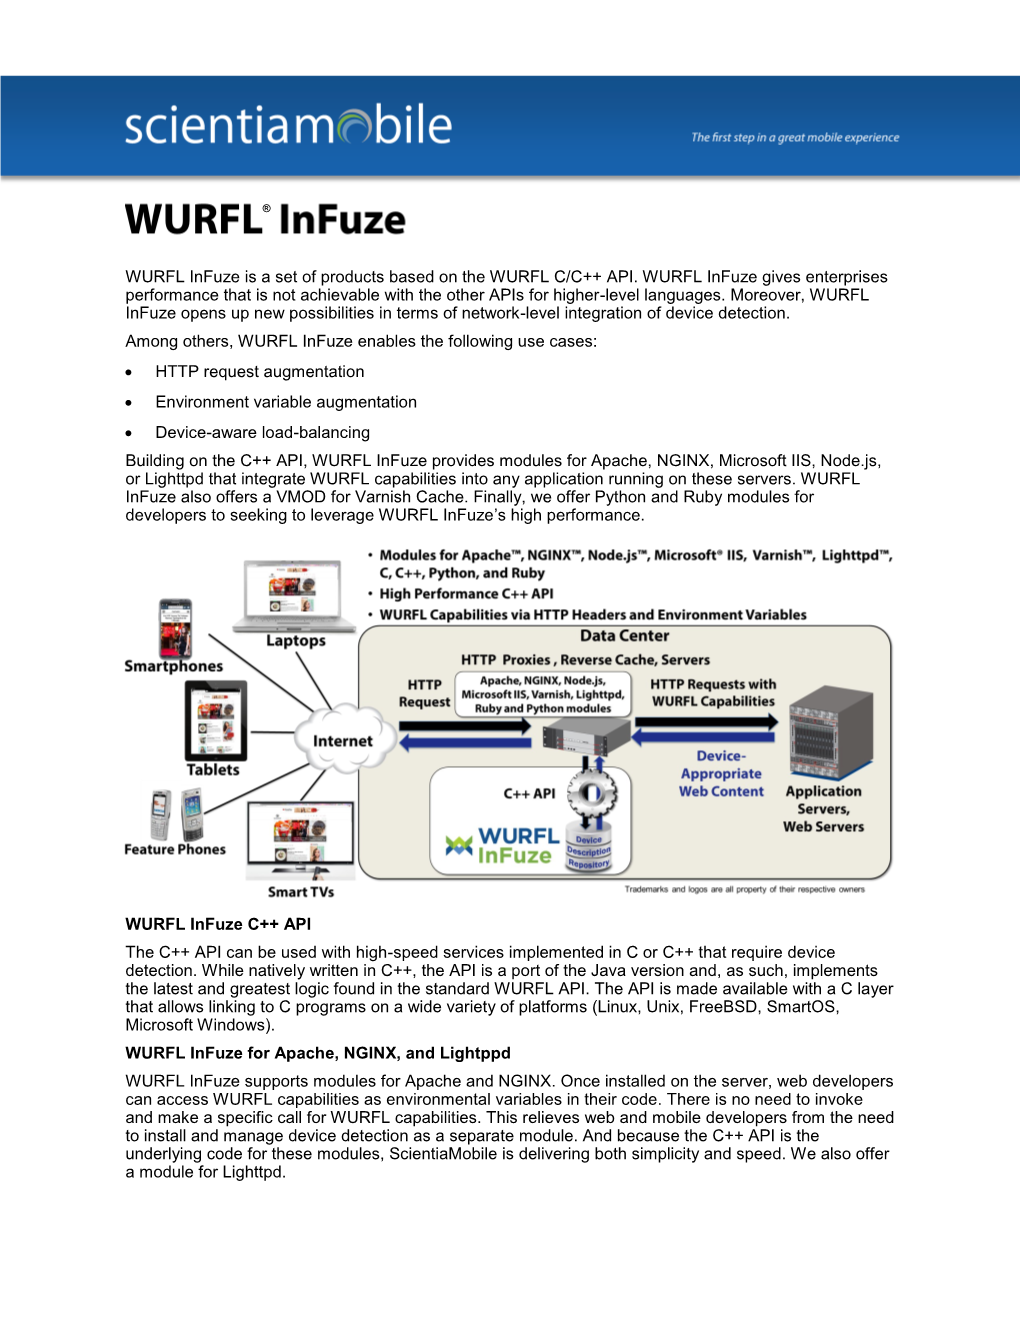 WURFL Infuze Is a Set of Products Based on the WURFL C/C++ API